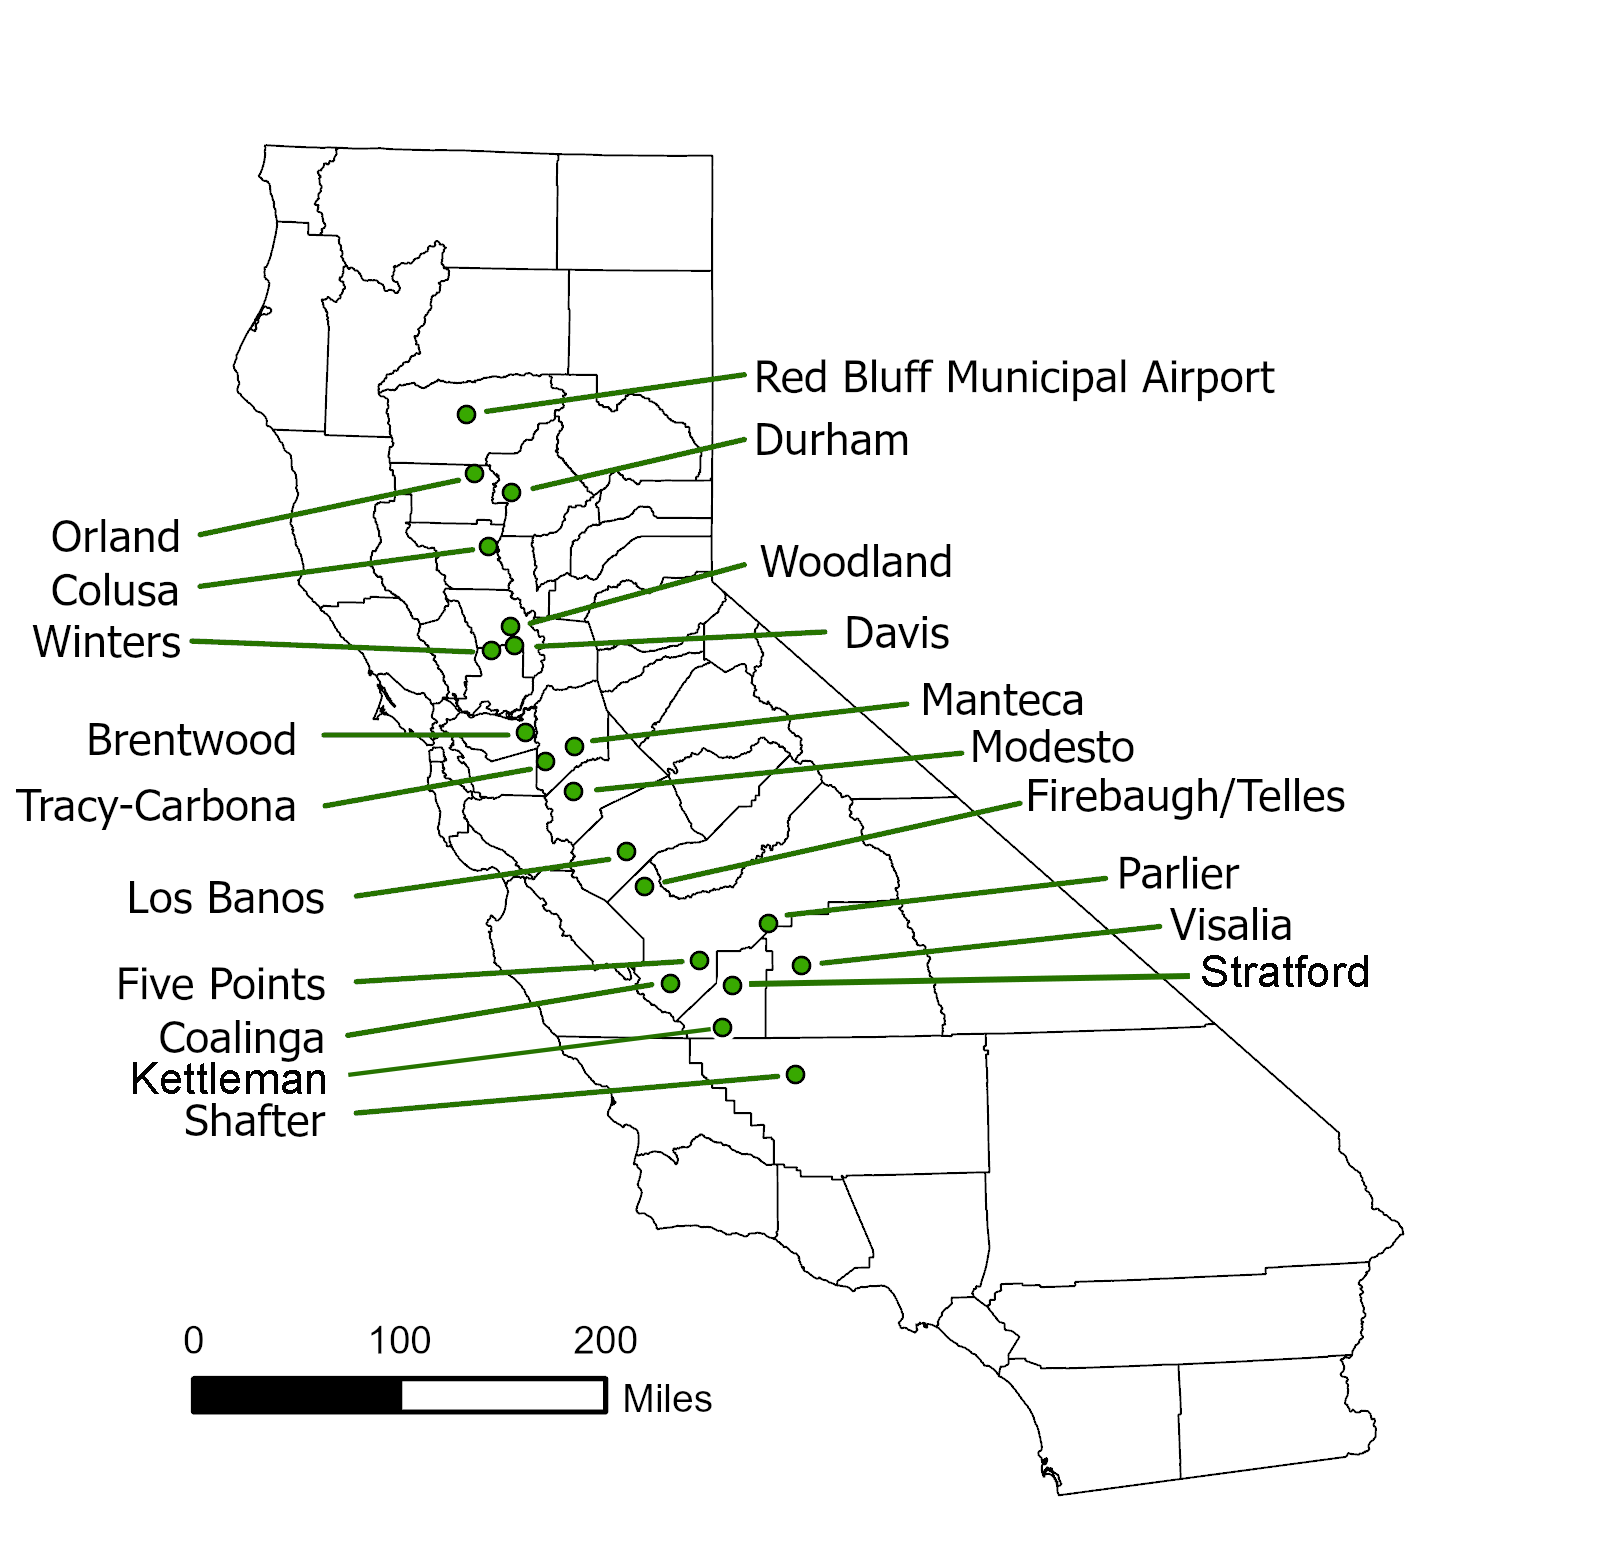 sites of chill sites monitoring, the most northern was Red bluff the most soutern was Shafter